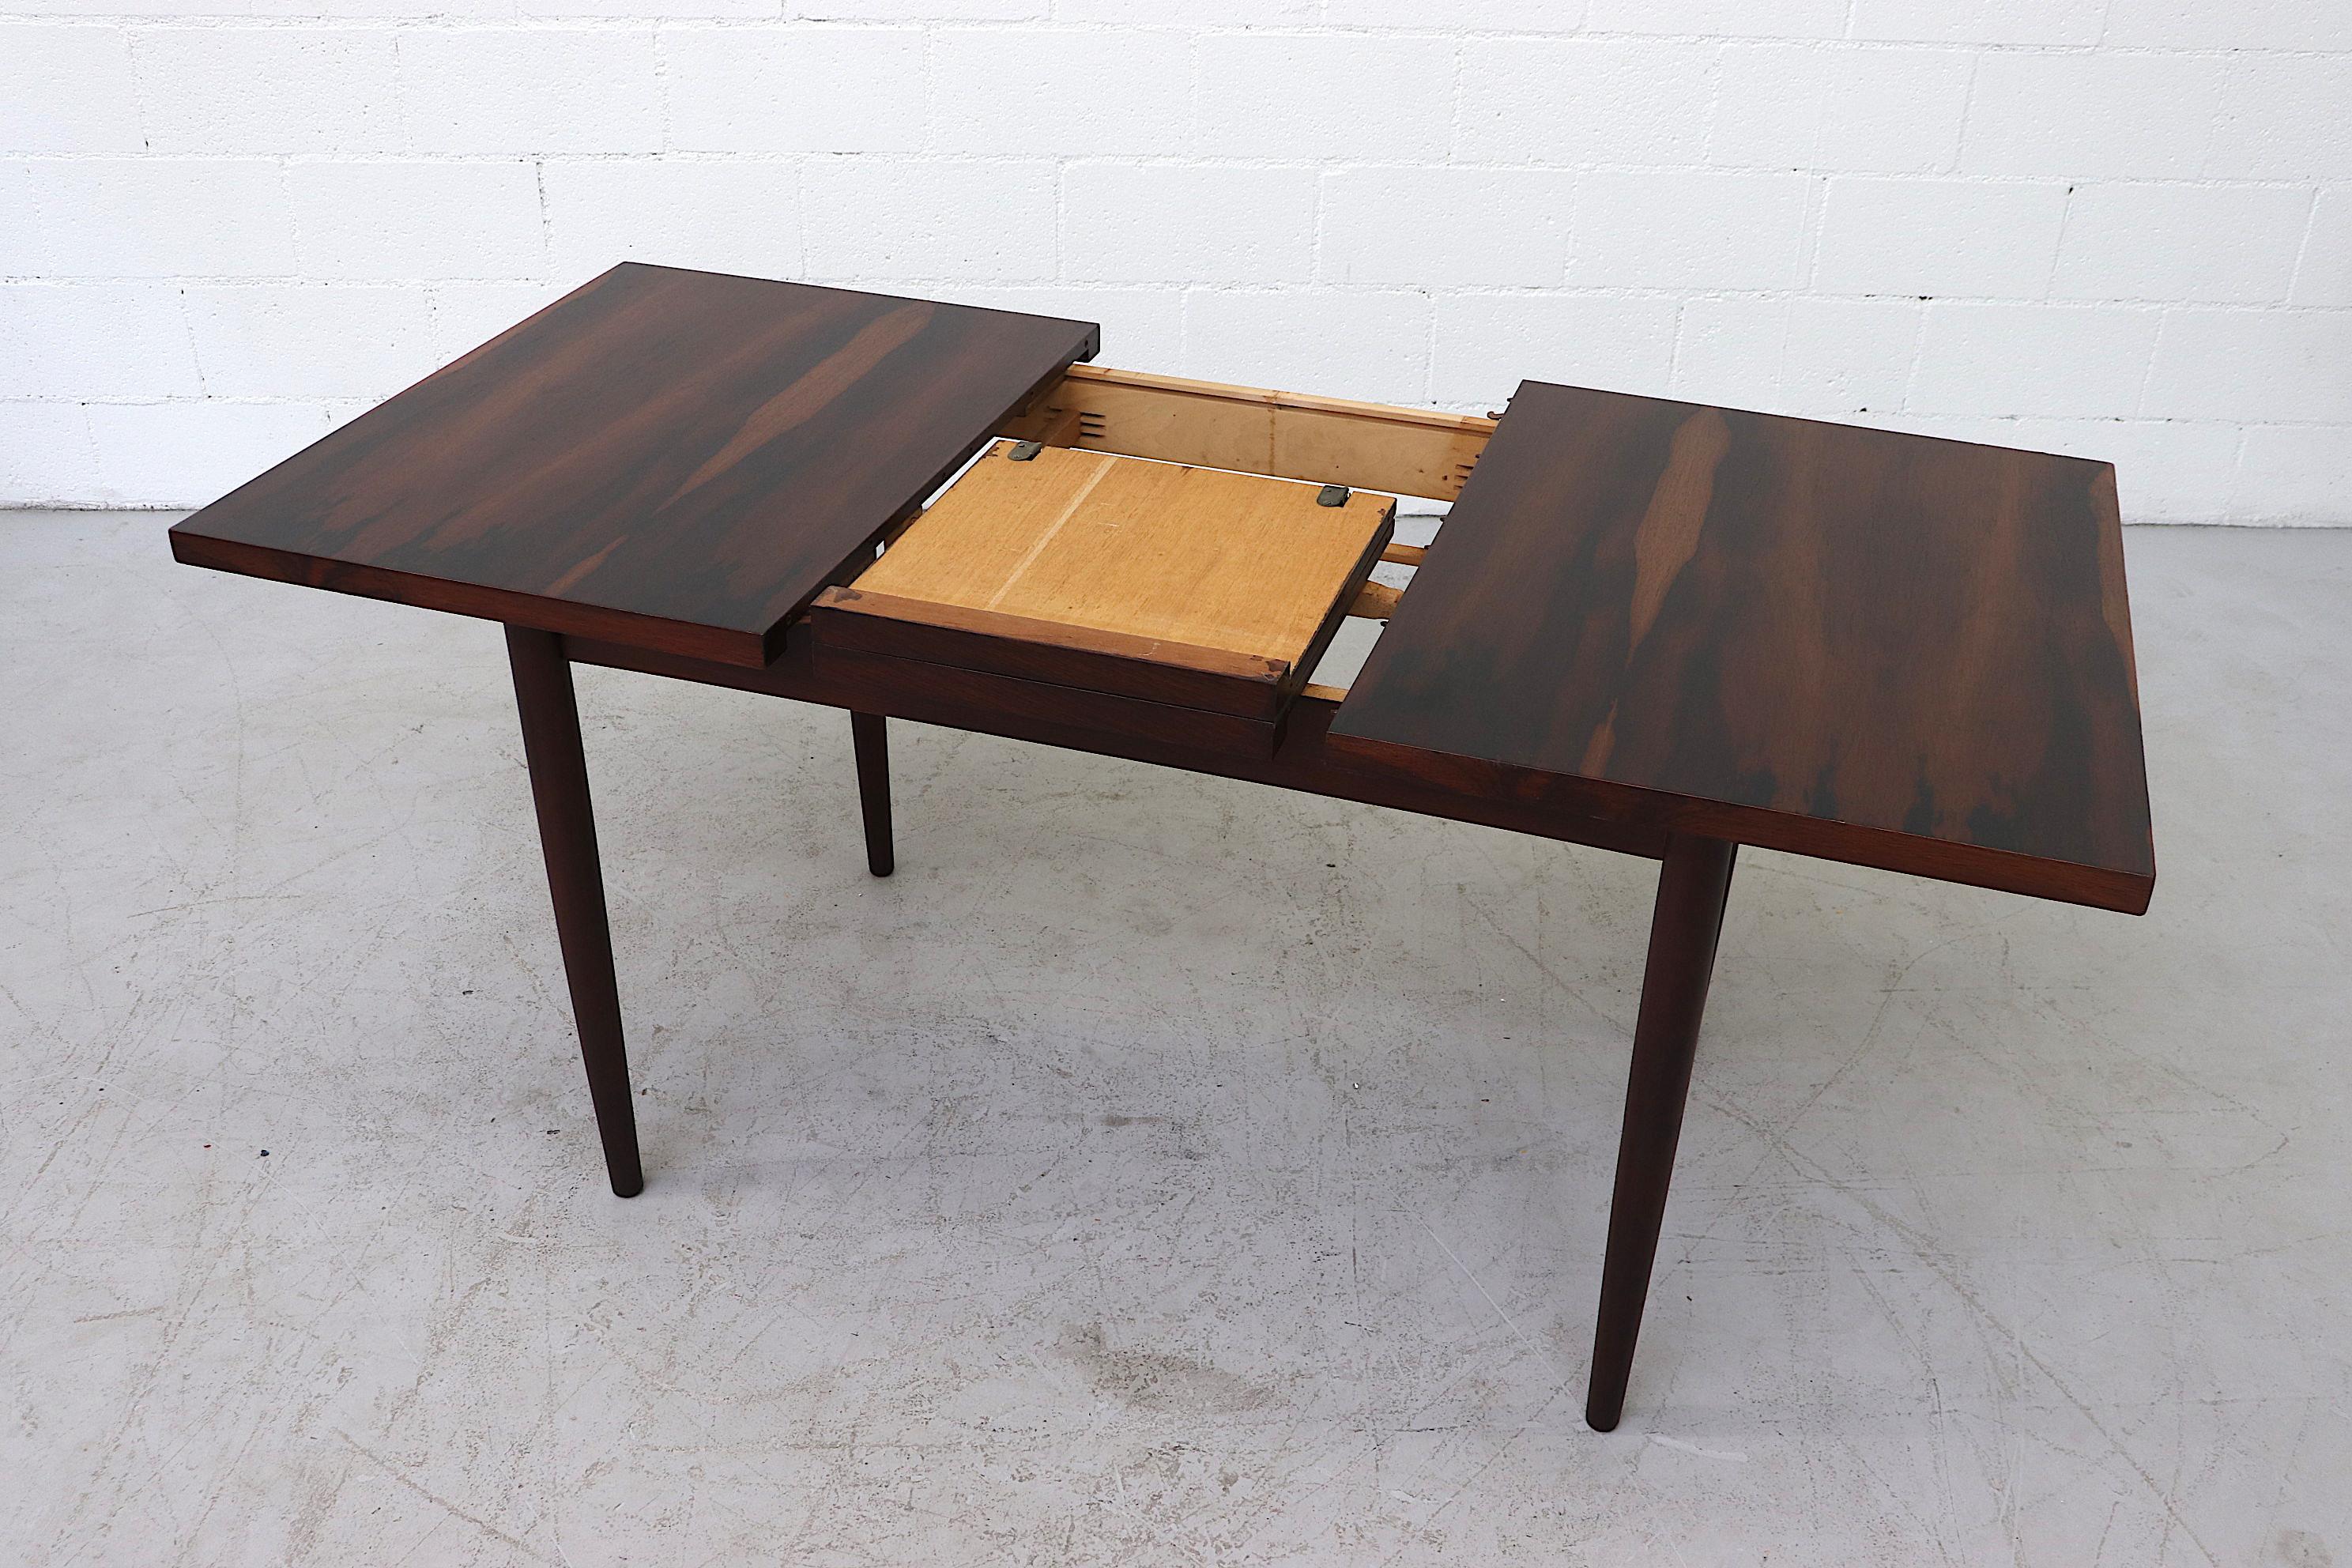 Dutch Midcentury Rosewood Dining Table with Hidden Leaf